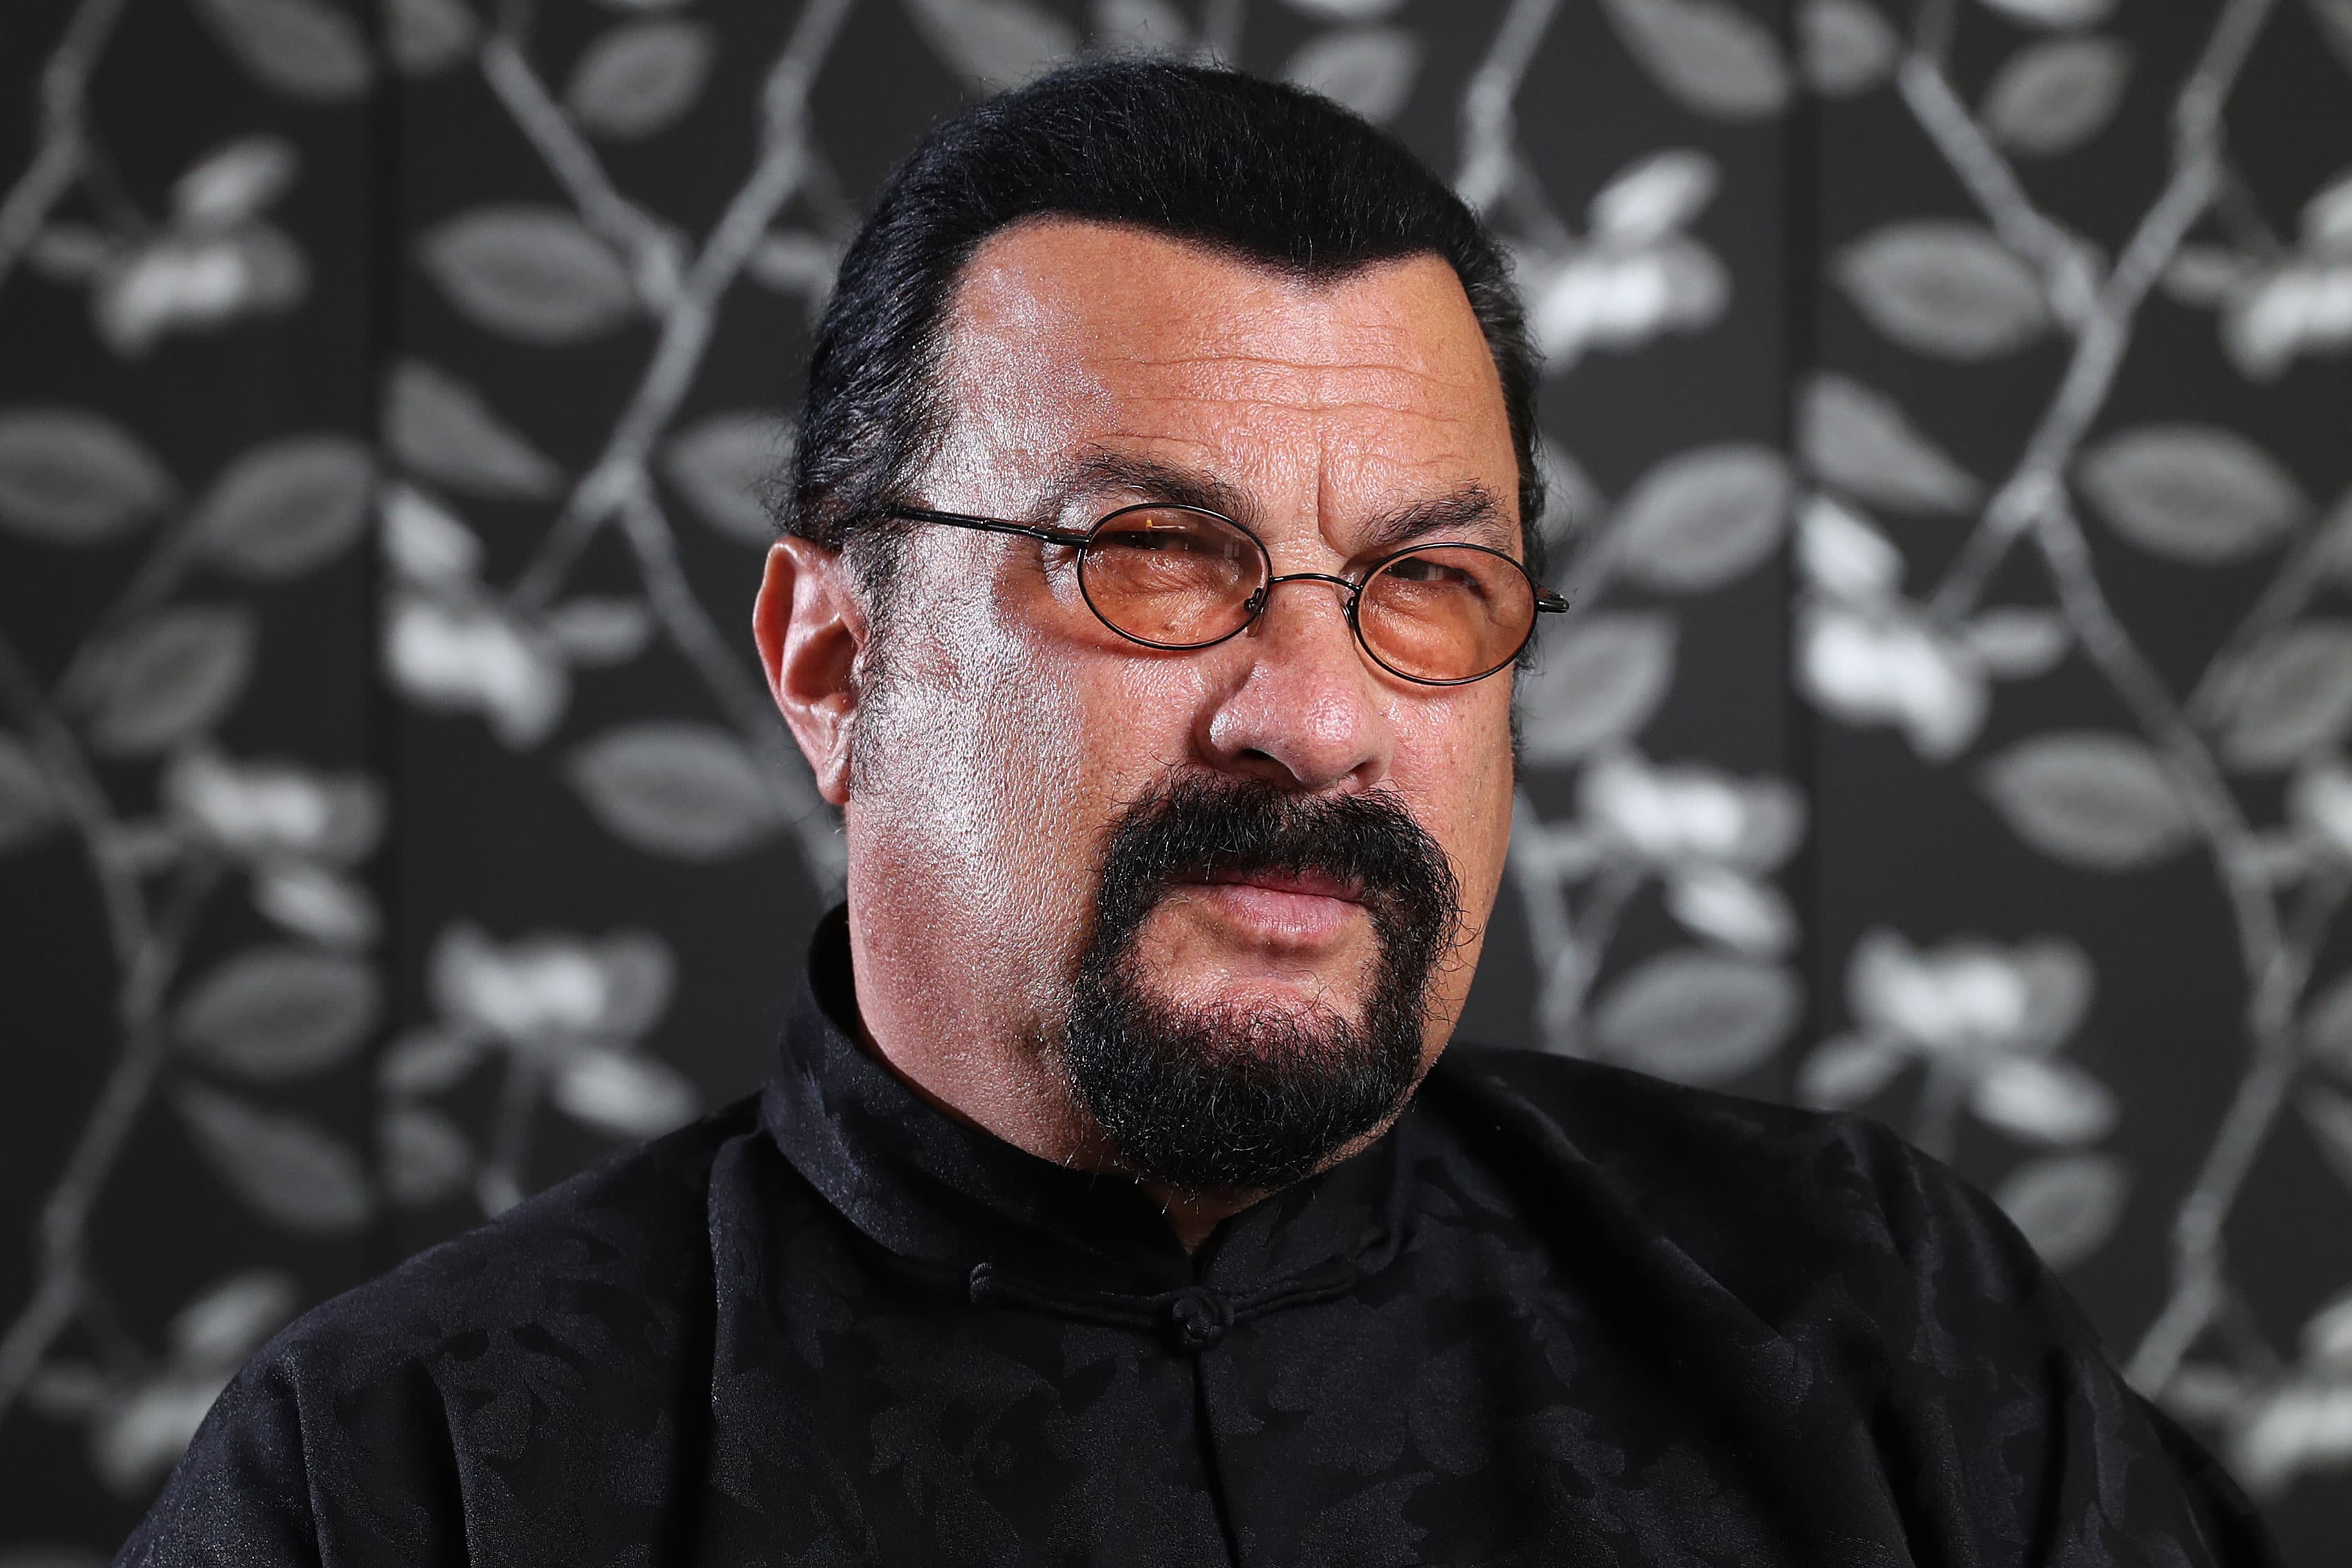 Steven Seagal settles SEC cryptocurrency bitcoin touting case